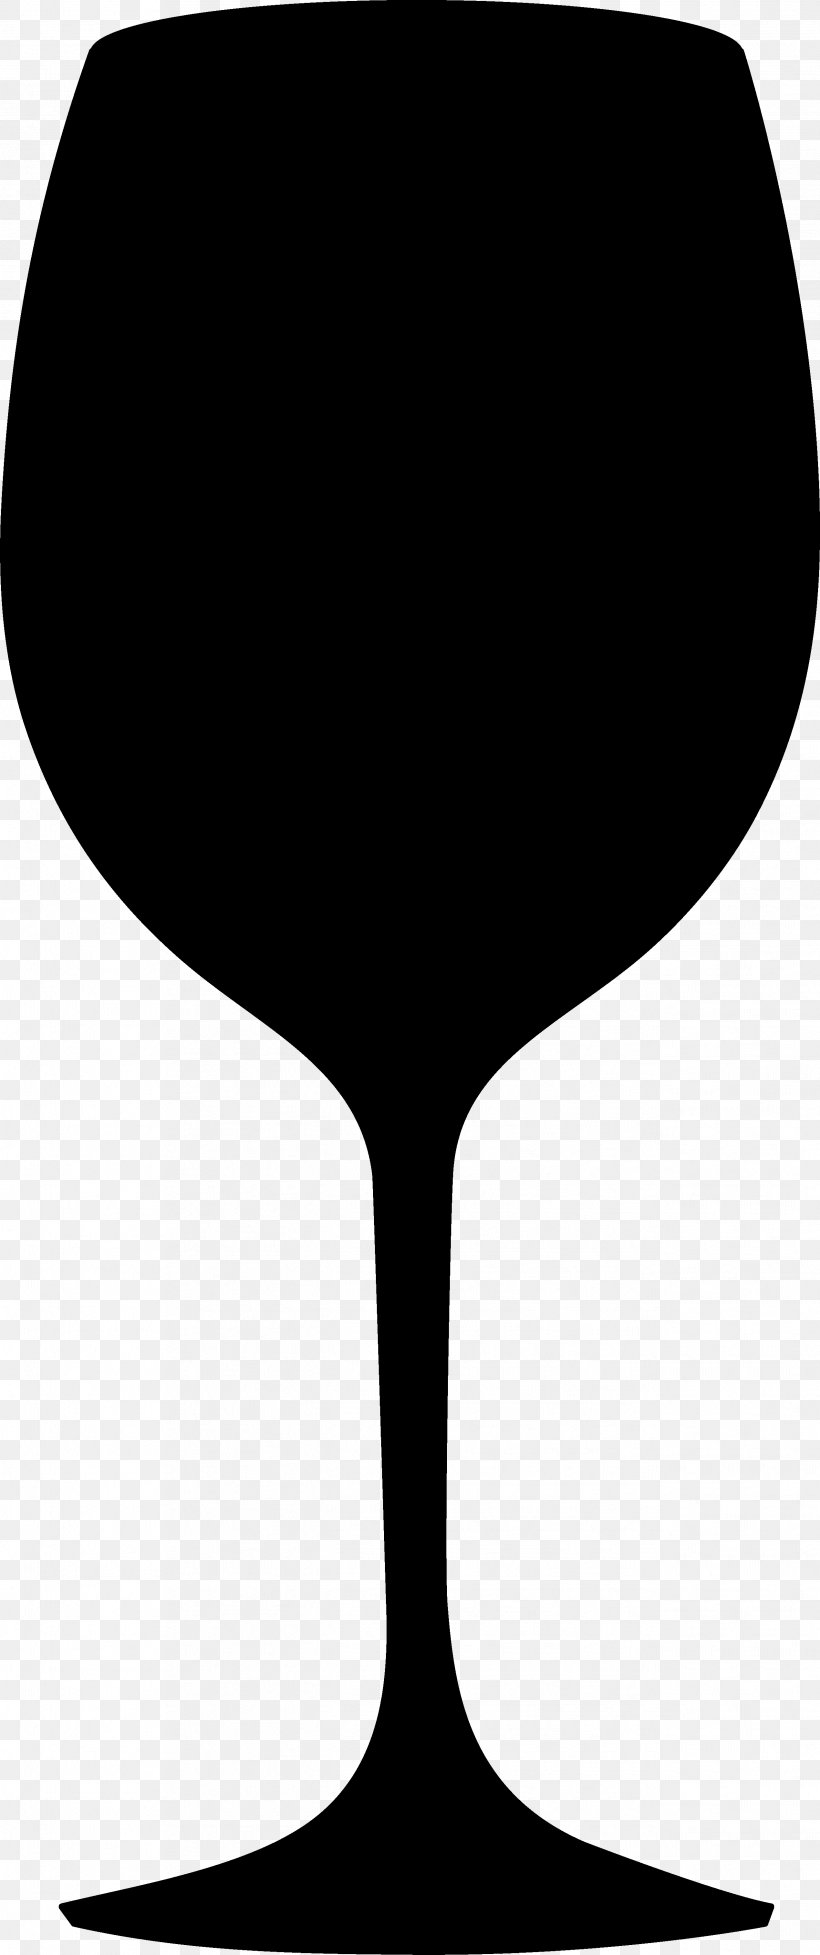 Wine Glass Champagne Glass Illustration, PNG, 2539x6056px, Wine Glass, Bar, Blackandwhite, Bottle, Champagne Download Free